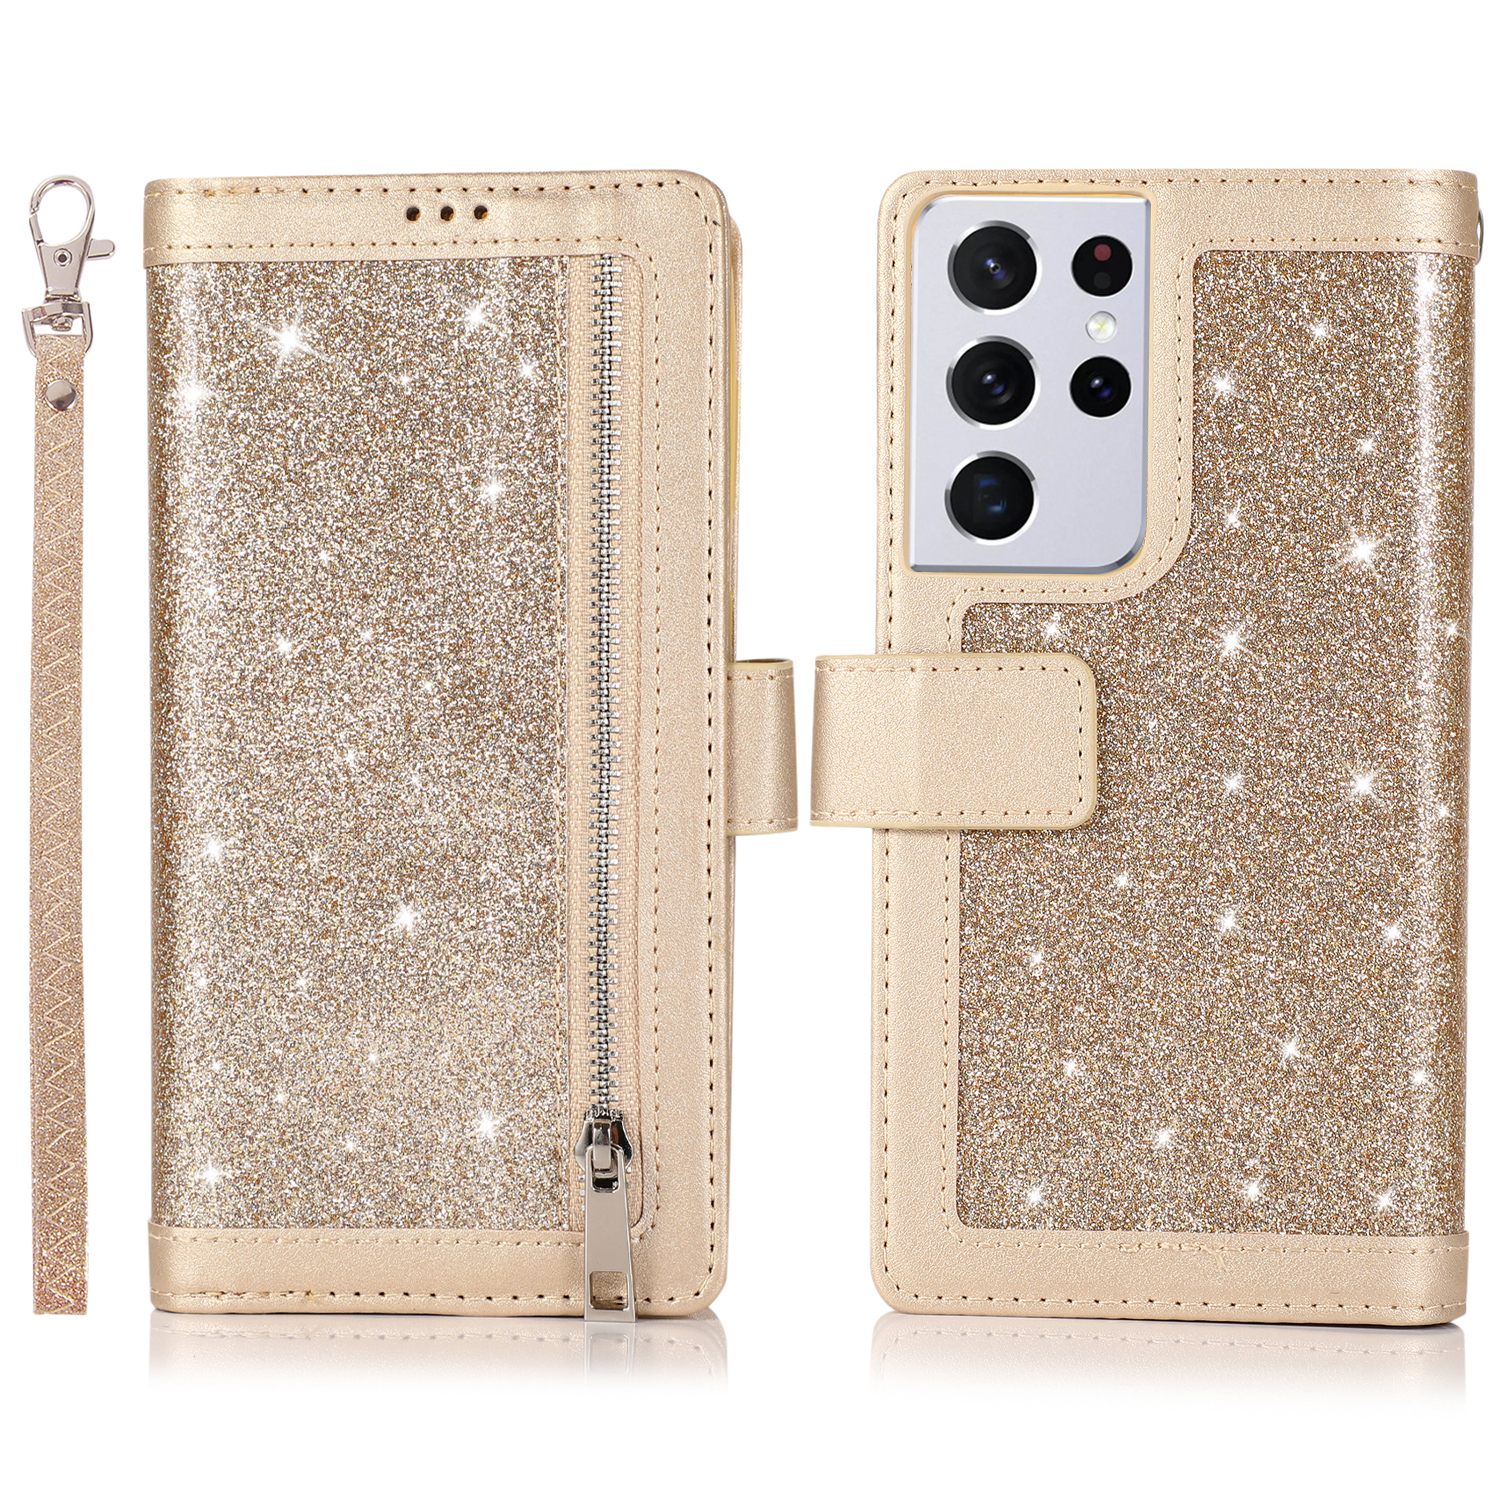 Galaxy S21 Ultra Wallet Case,Allytech Bling Flip Folio PU Leather Magnetic Kickstand Cell Phone Cover with Credit Card Holder,Zipper Pocket Wrist Strap for Samsung Galaxy S21 Ultra 5G 6.8 Inch, Gold - image 1 of 7